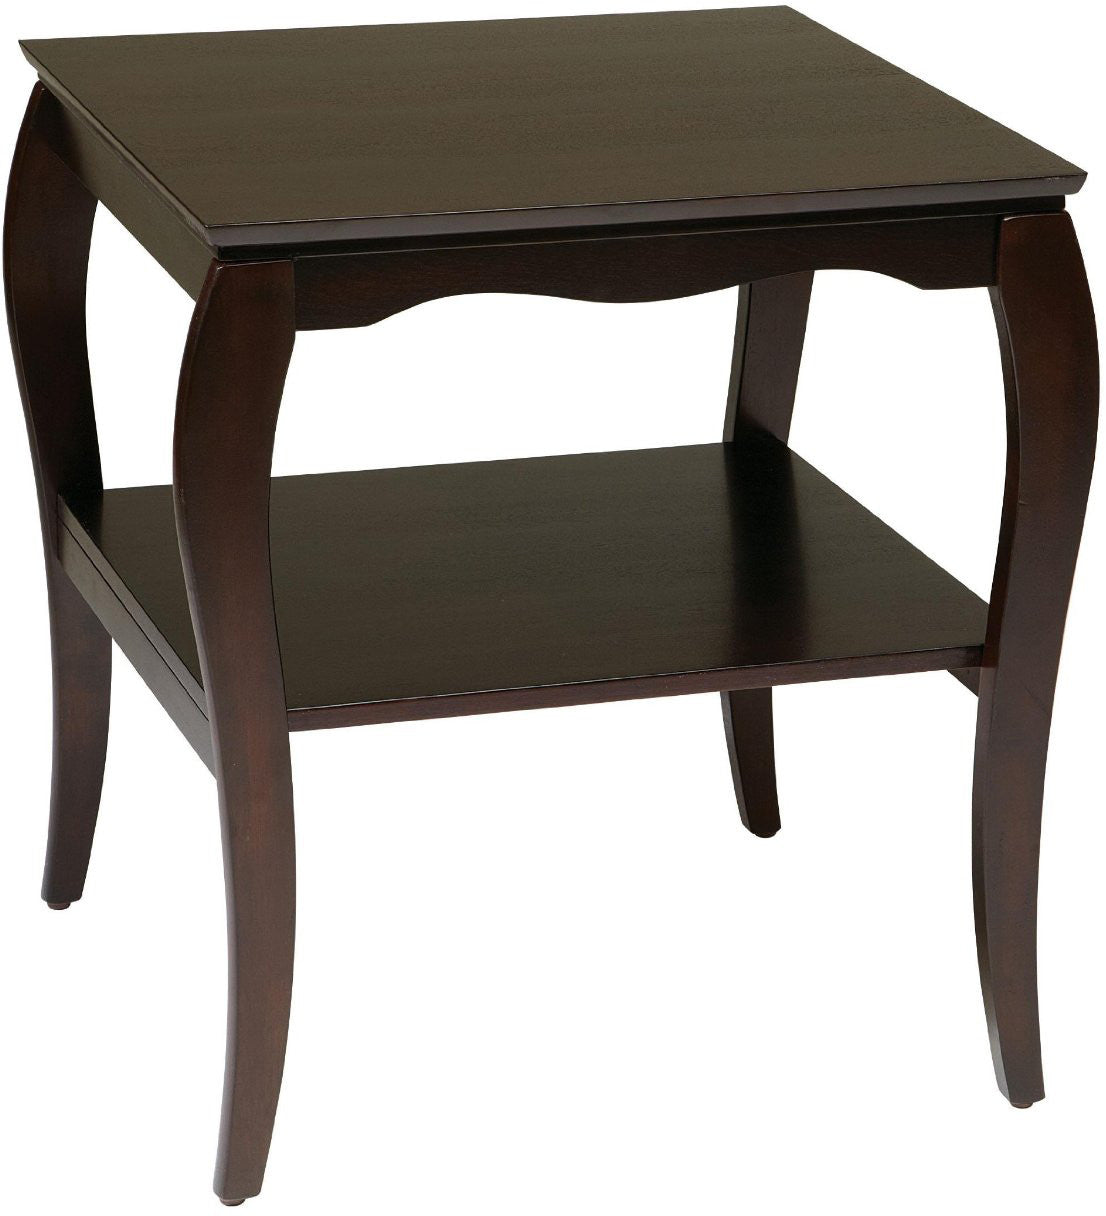 Work Smart / Osp Designs Bn09mah End Table In Mahogany